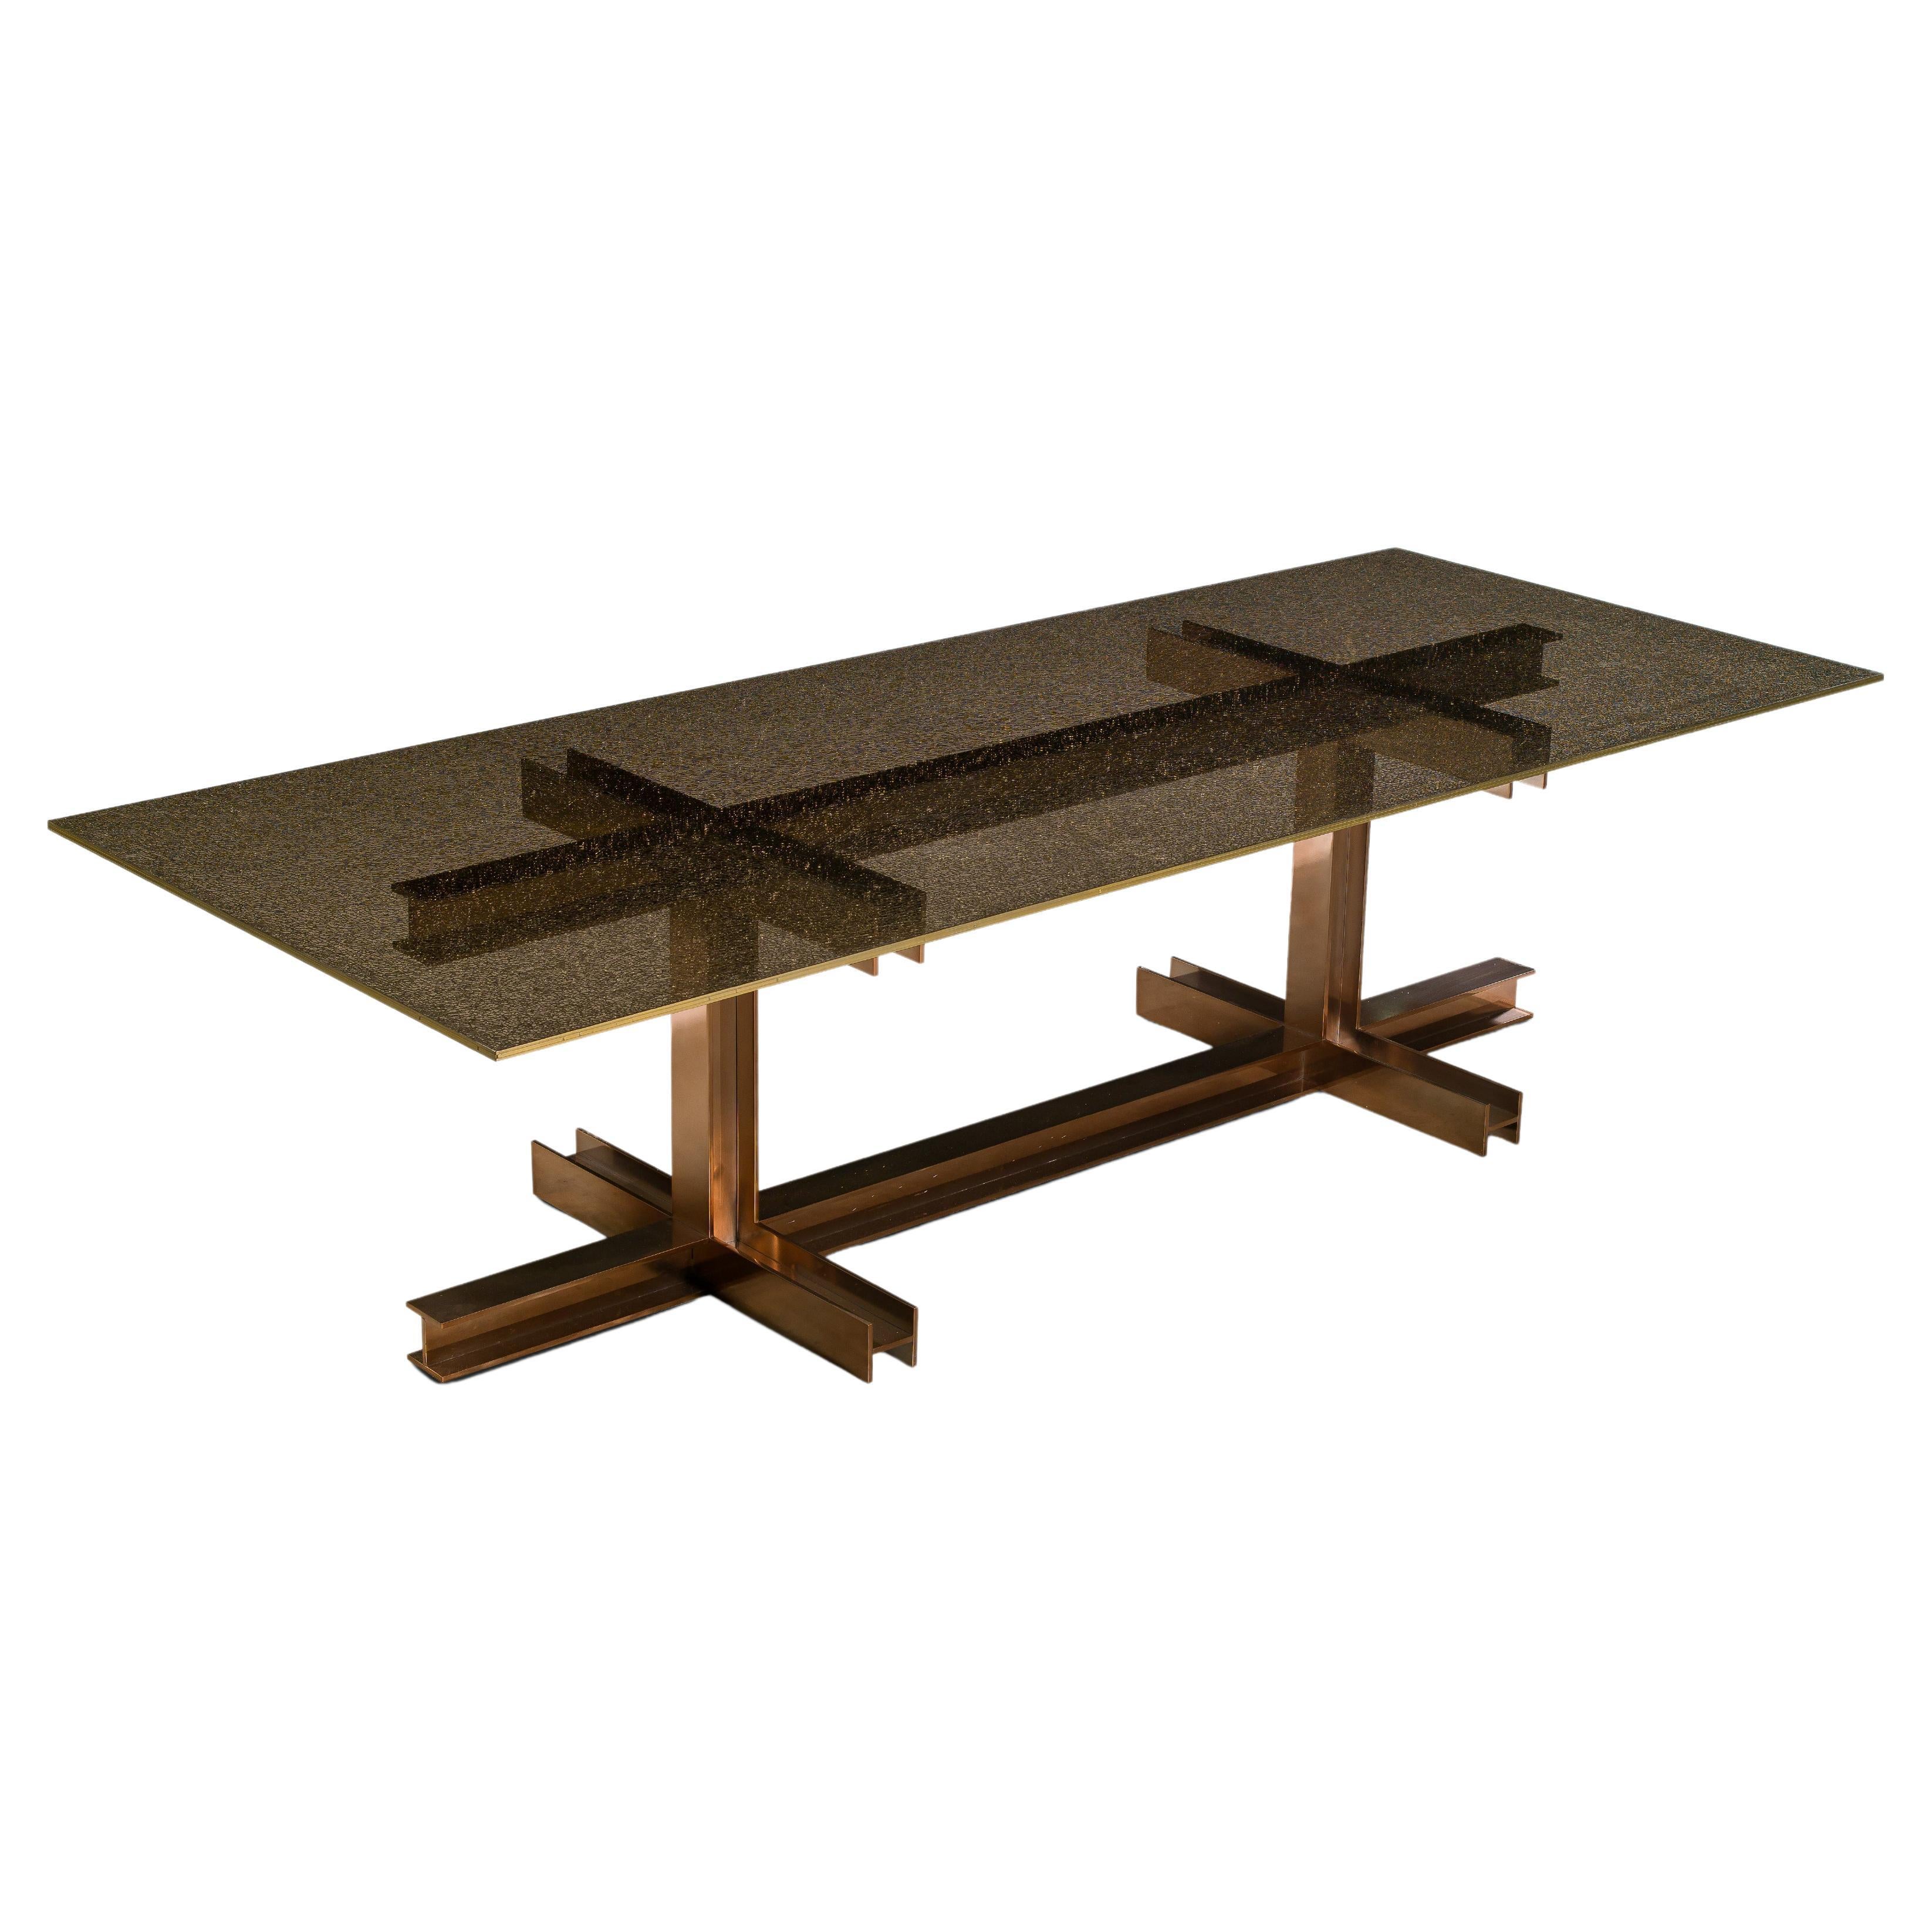 Girder, Dining Table with Glass in Crackle Effect